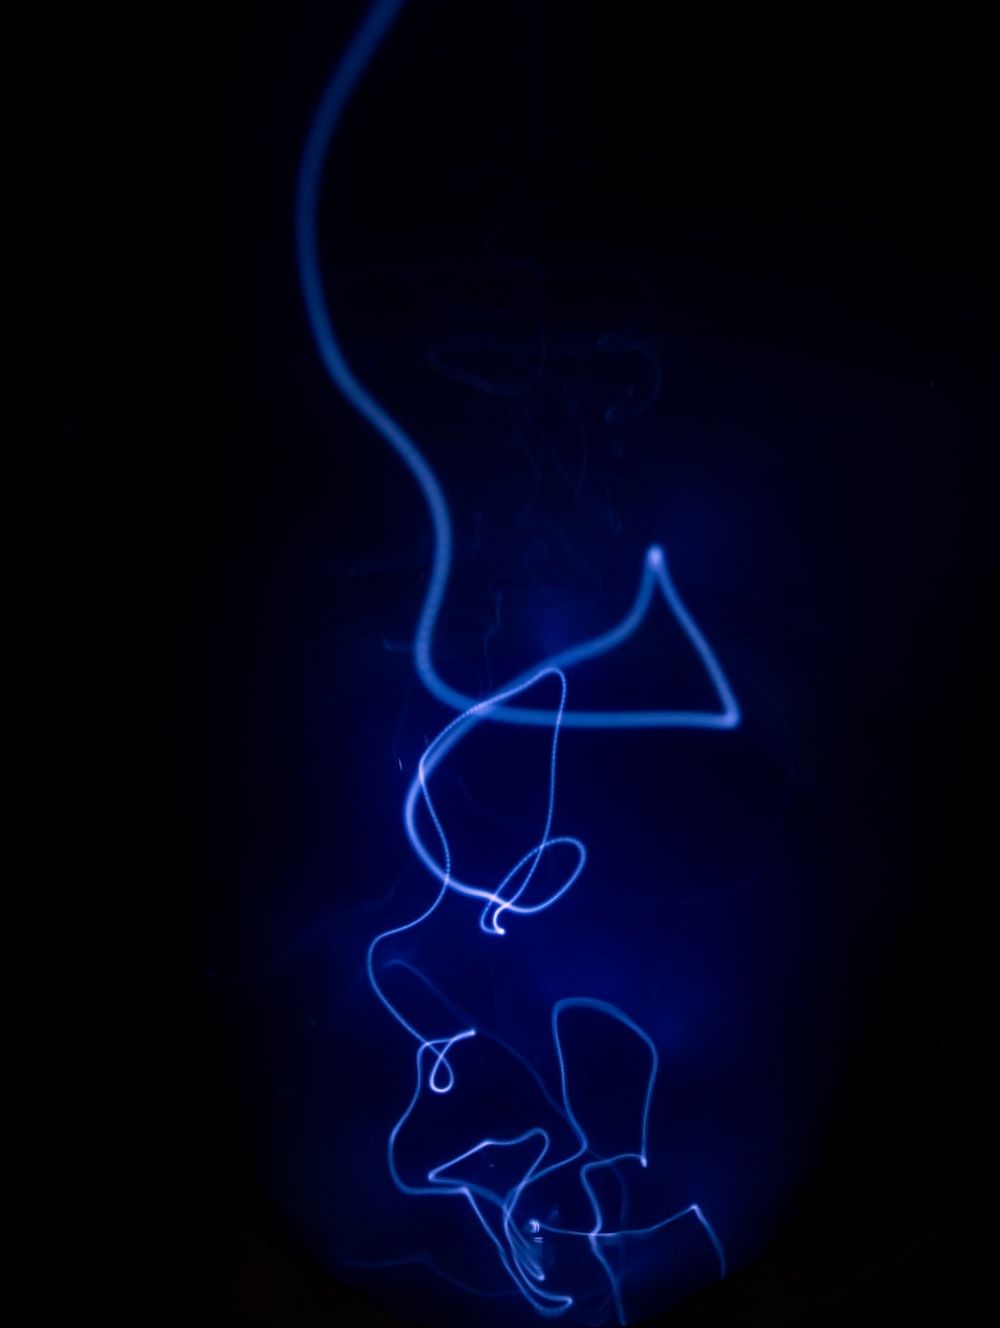 A blue light is shining on a black background photo